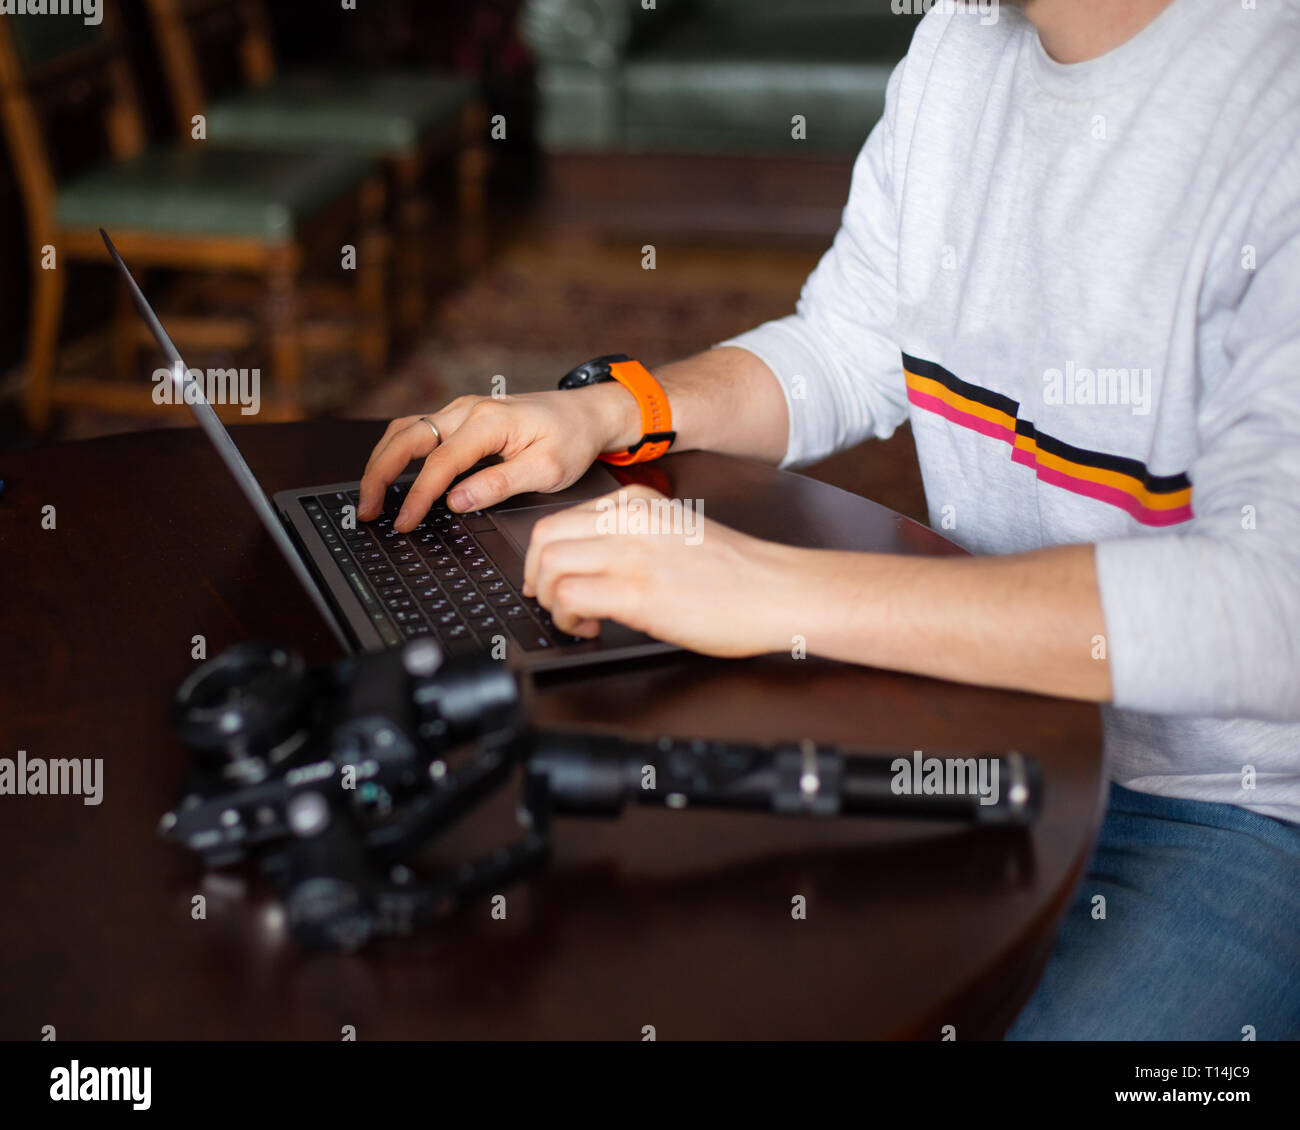 Laptop and camera on the table with hands of freelancer or blogger Stock Photo